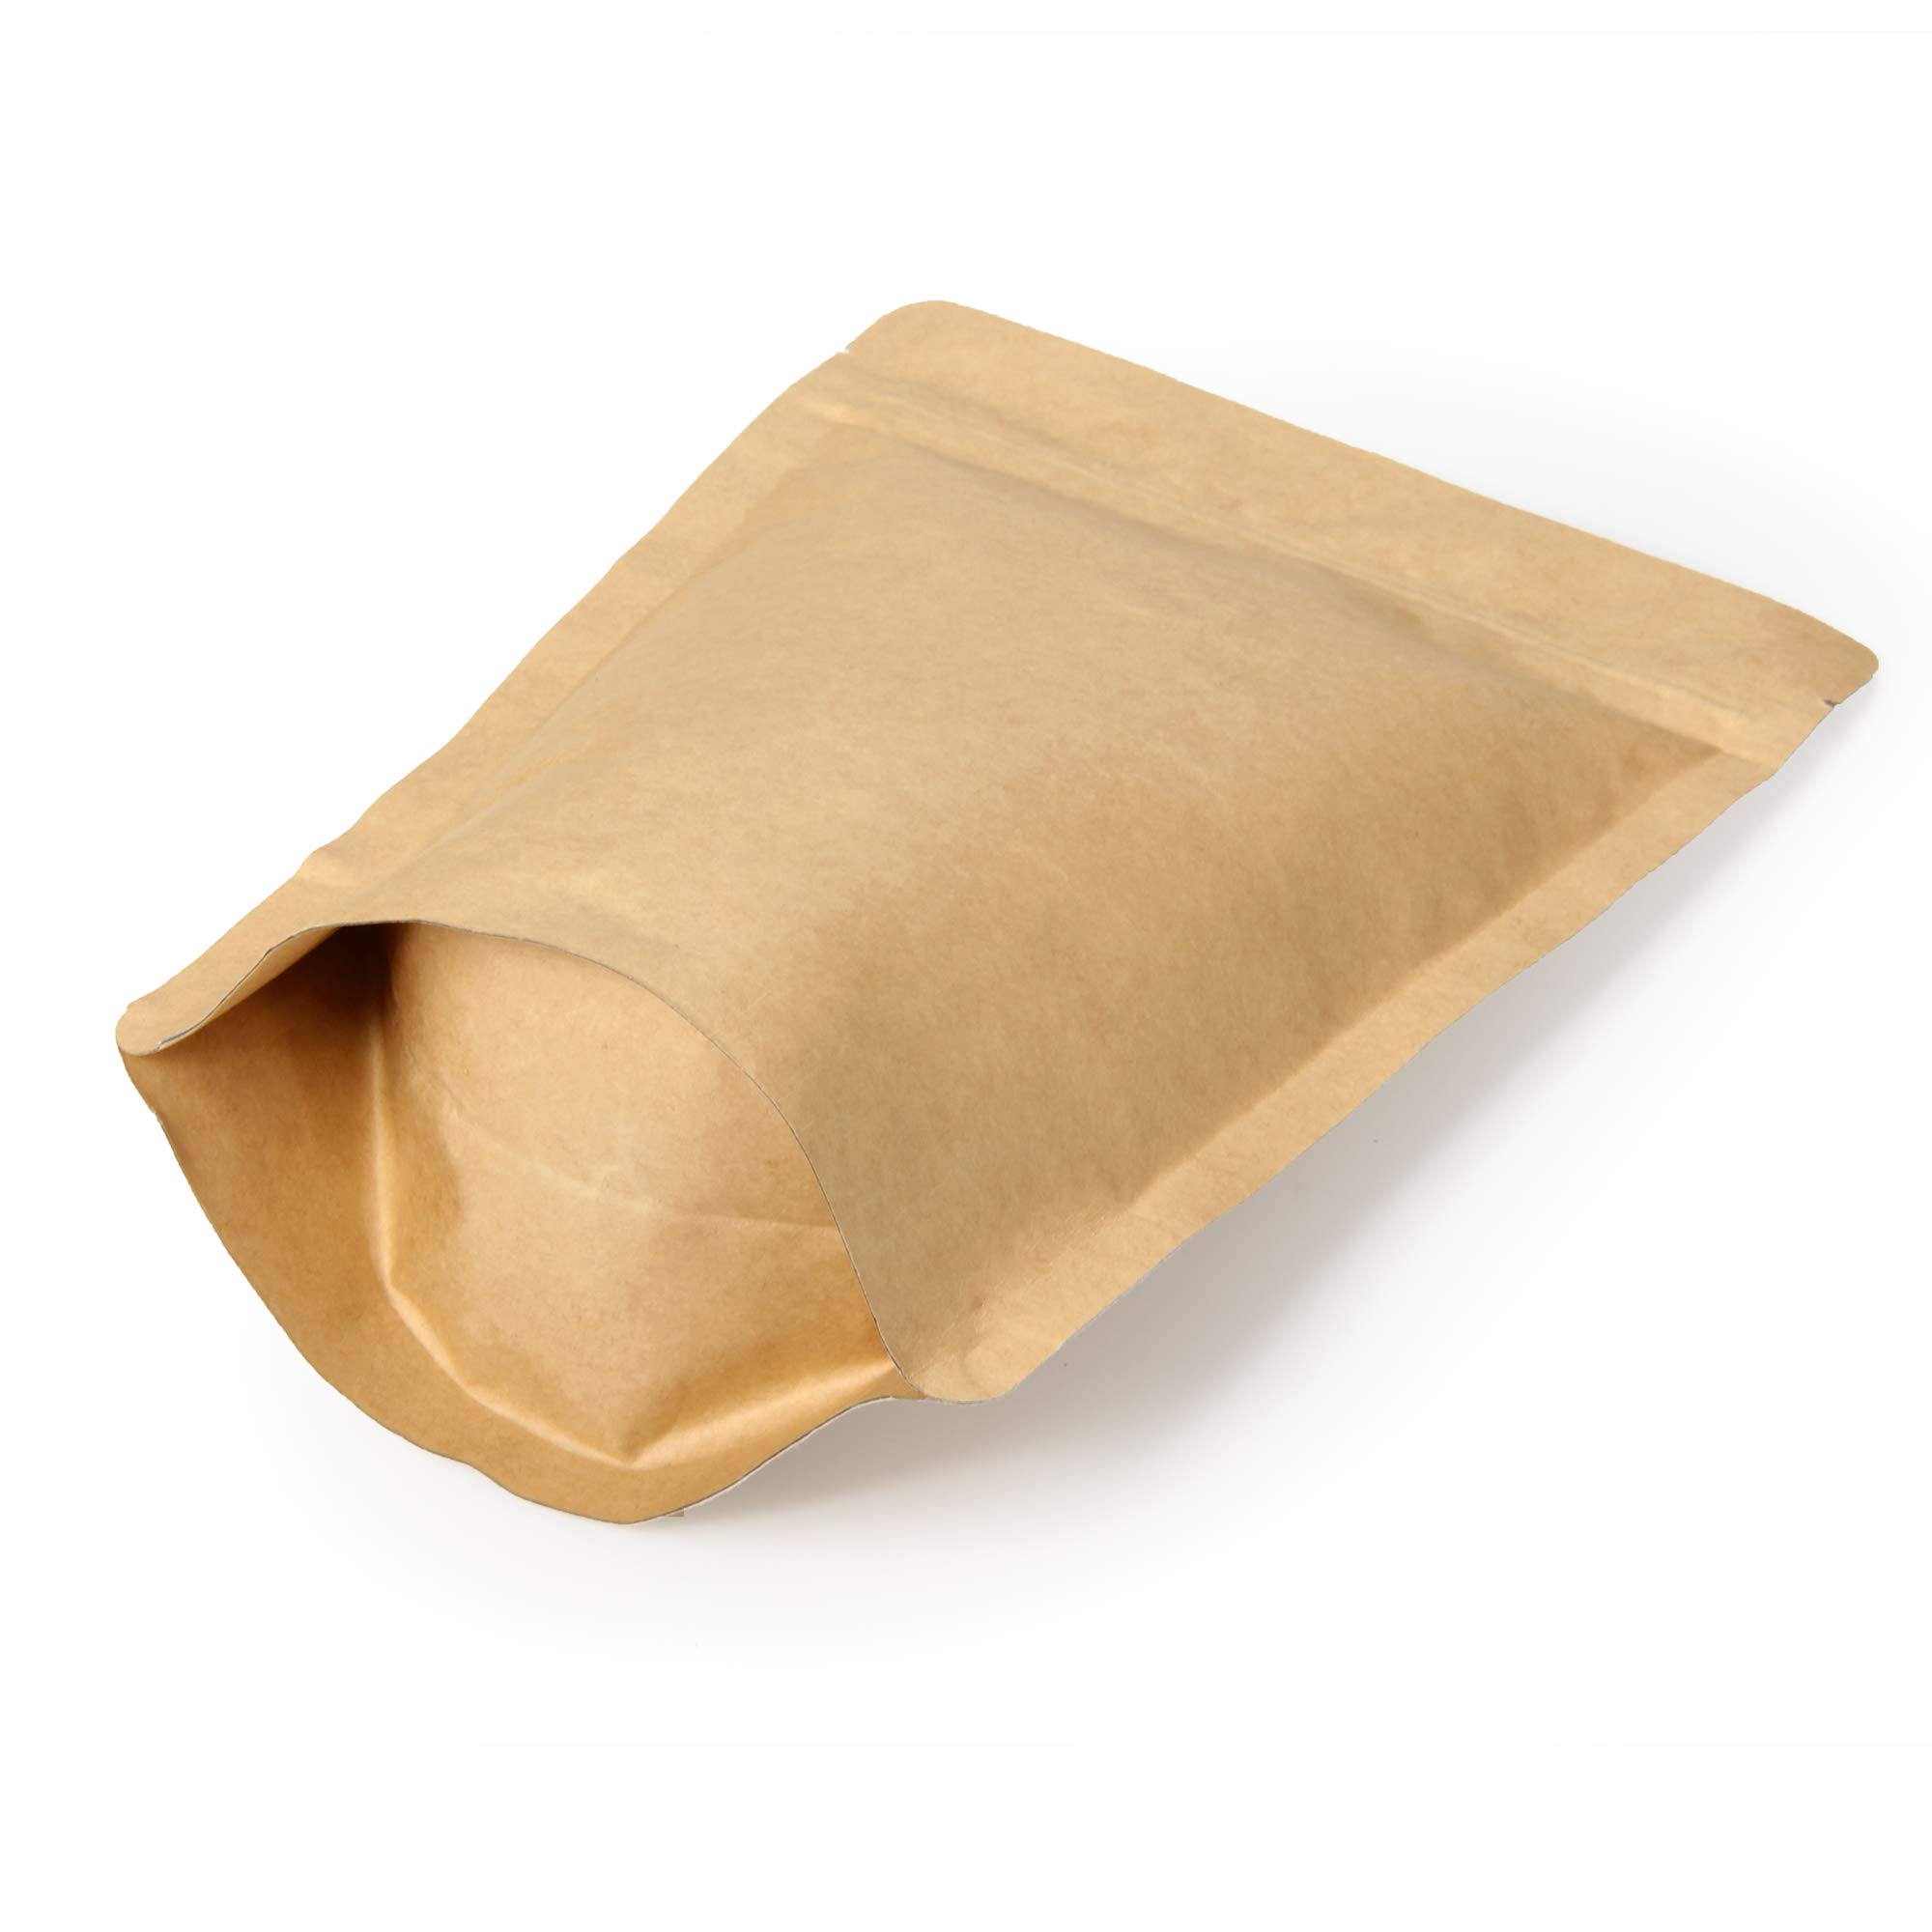 500g 16oz 1lb Kraft Paper Stand up Zipper Pouches Coffee Bags Coffee Pouches with Valve (Pack of 50)